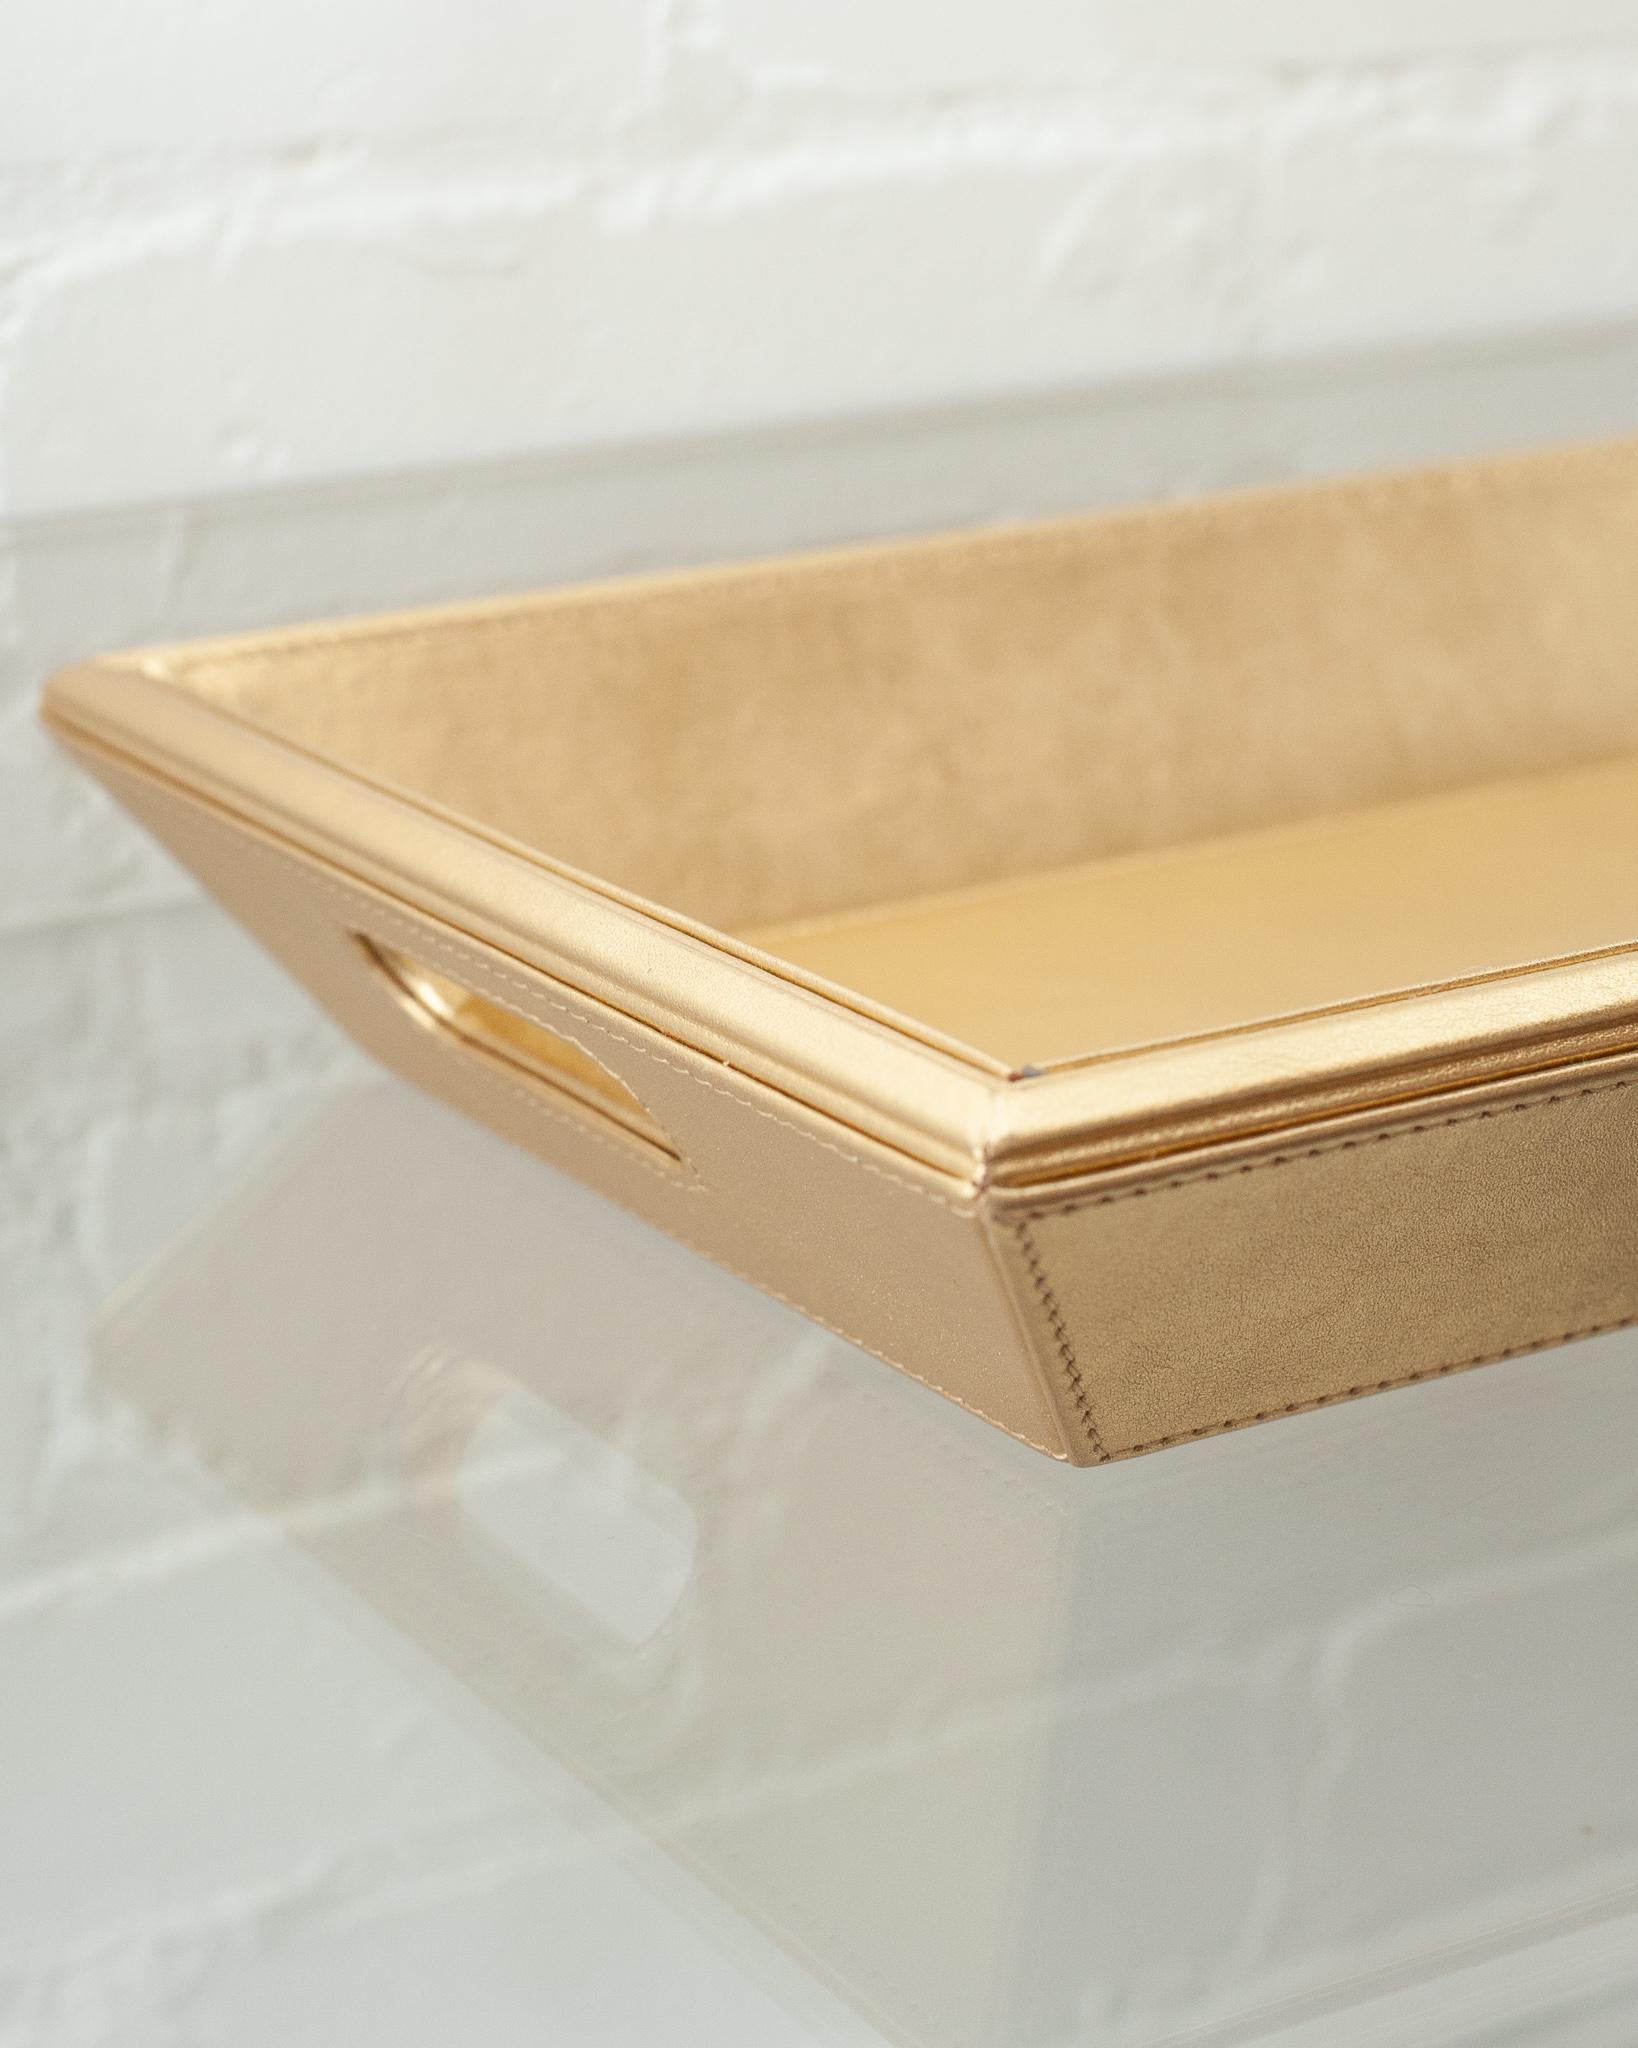 Argentine Contemporary Metallic Gold Leather Rectangular Tray For Sale